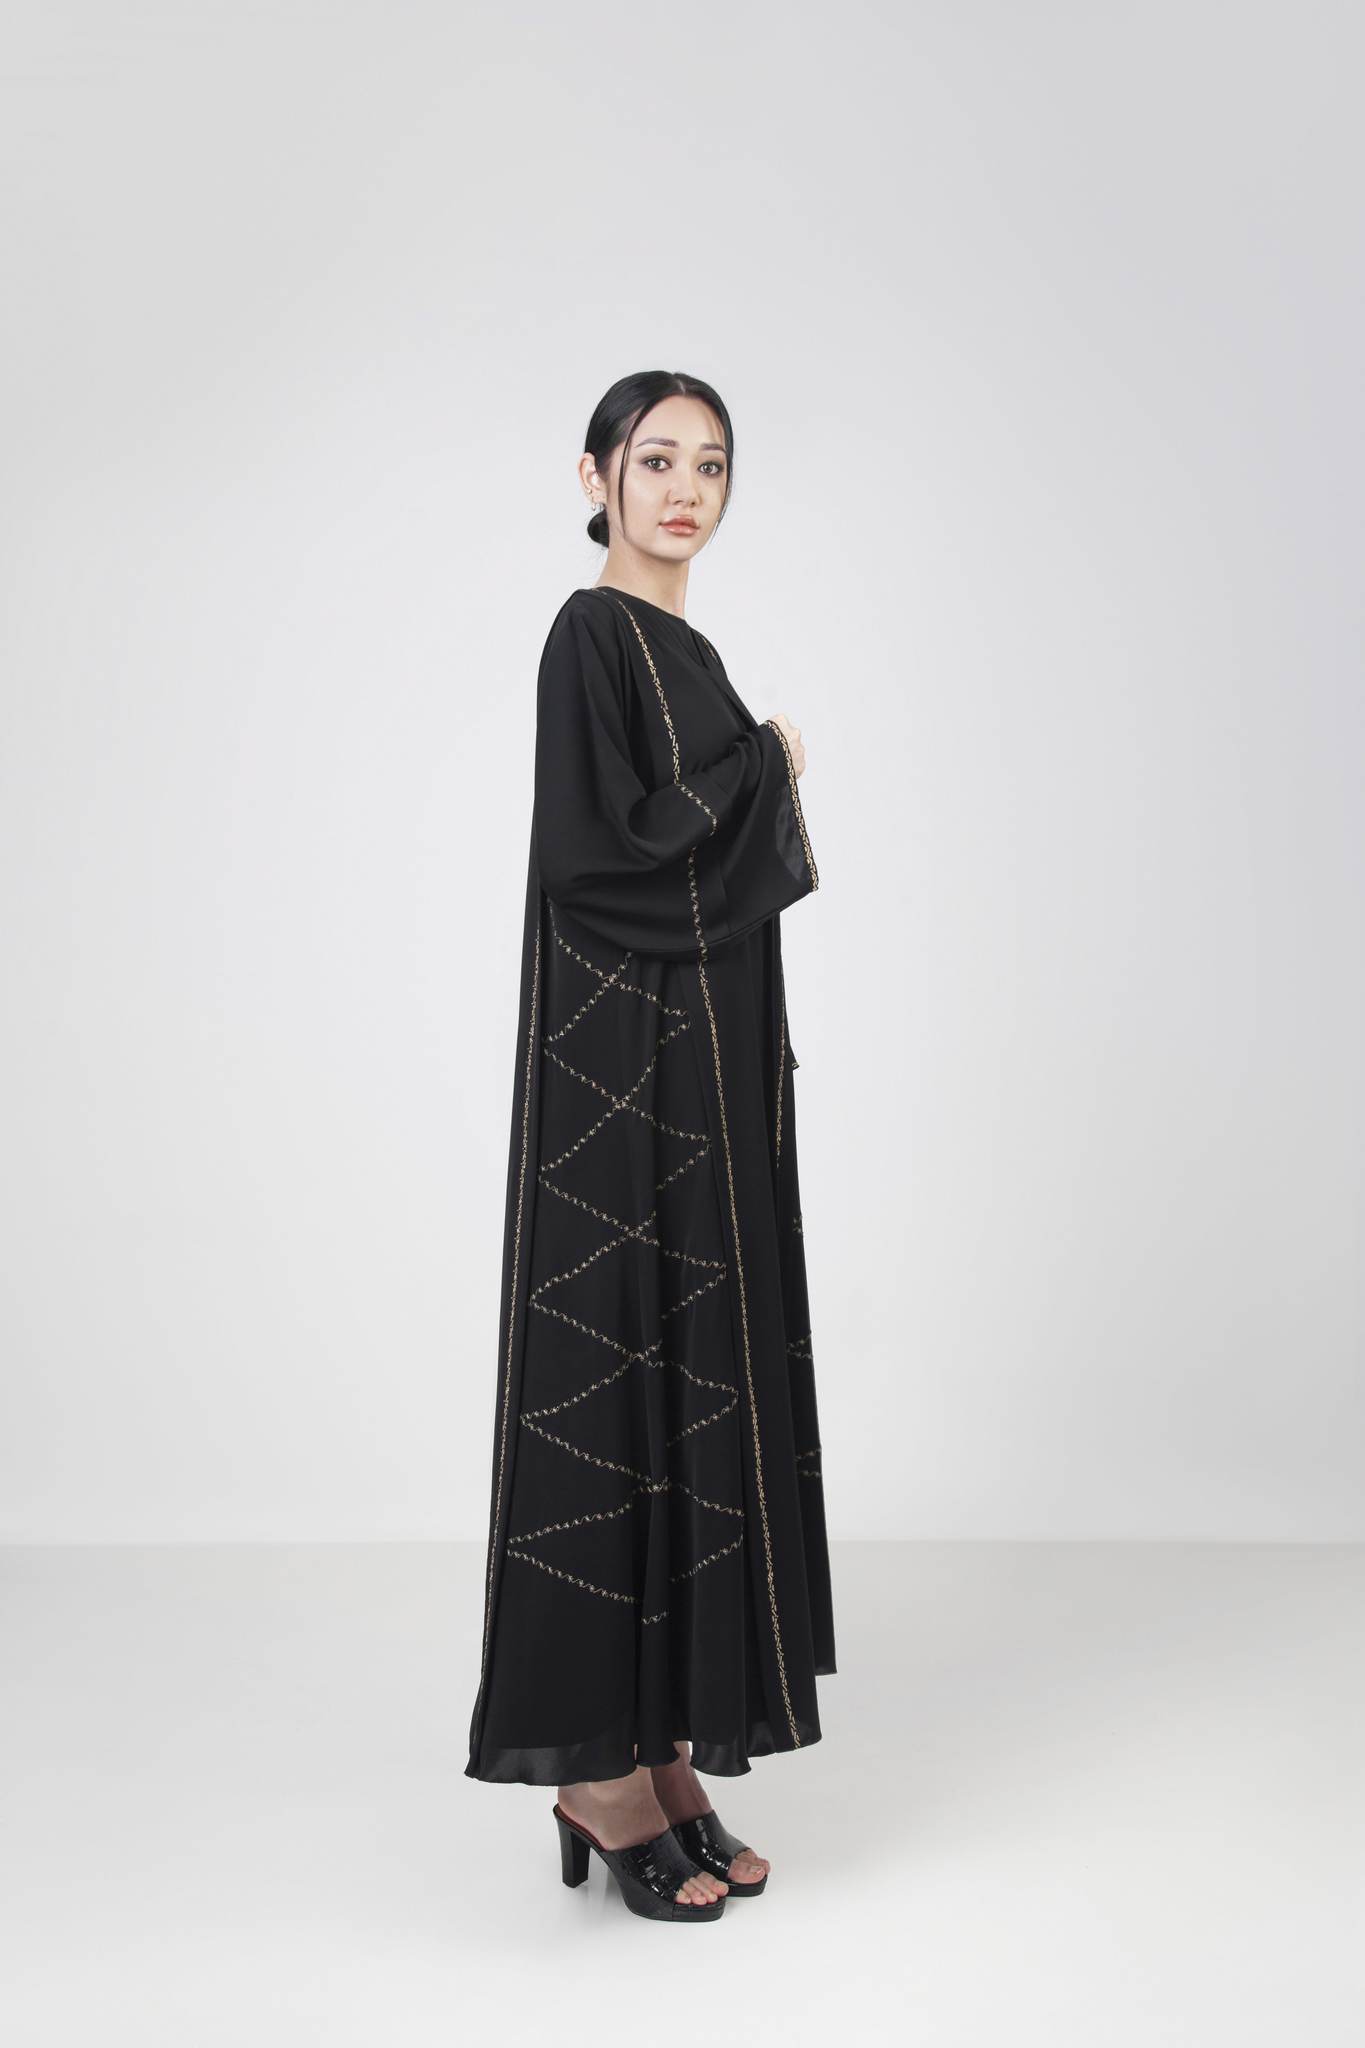 Classic Black Abaya With Design Piping Details